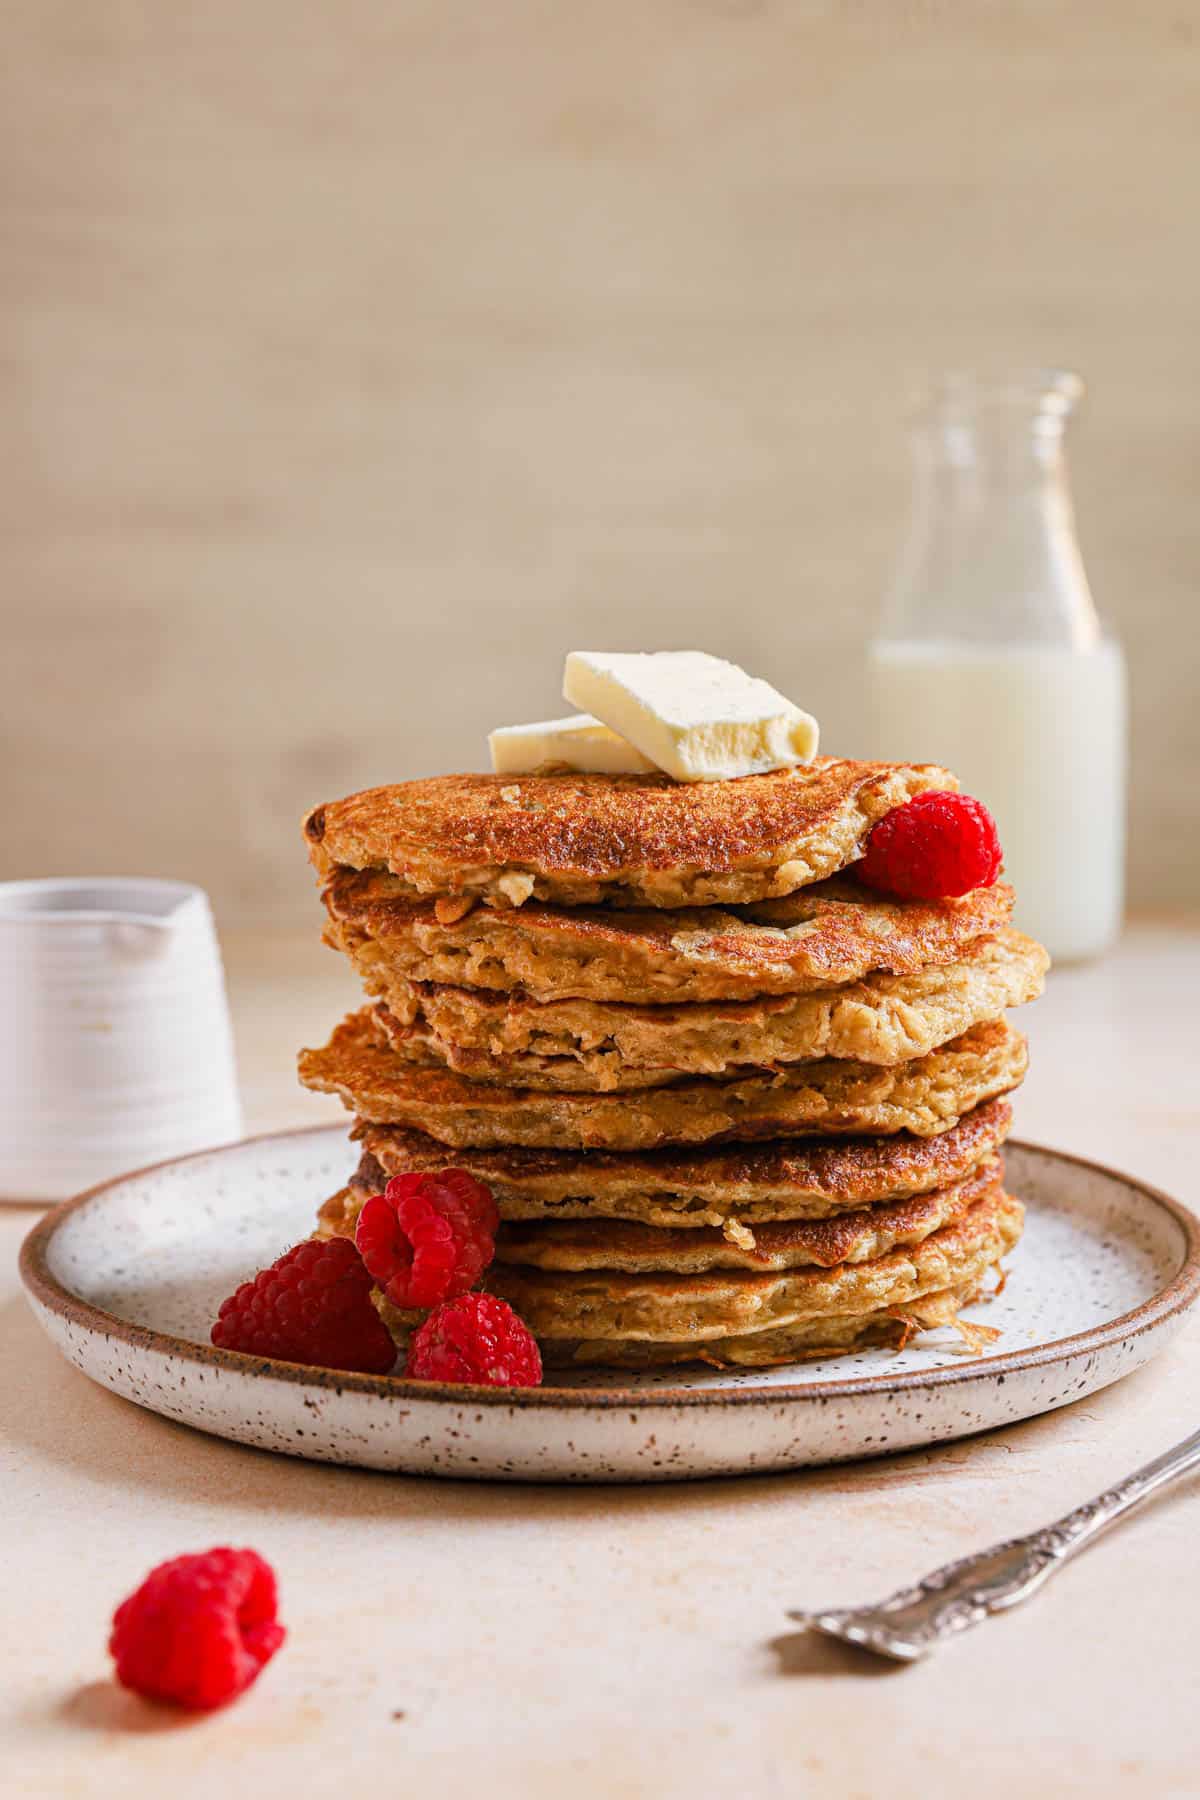 Stack of oatmeal pancakes on ceramic plate with raspberries and butter.